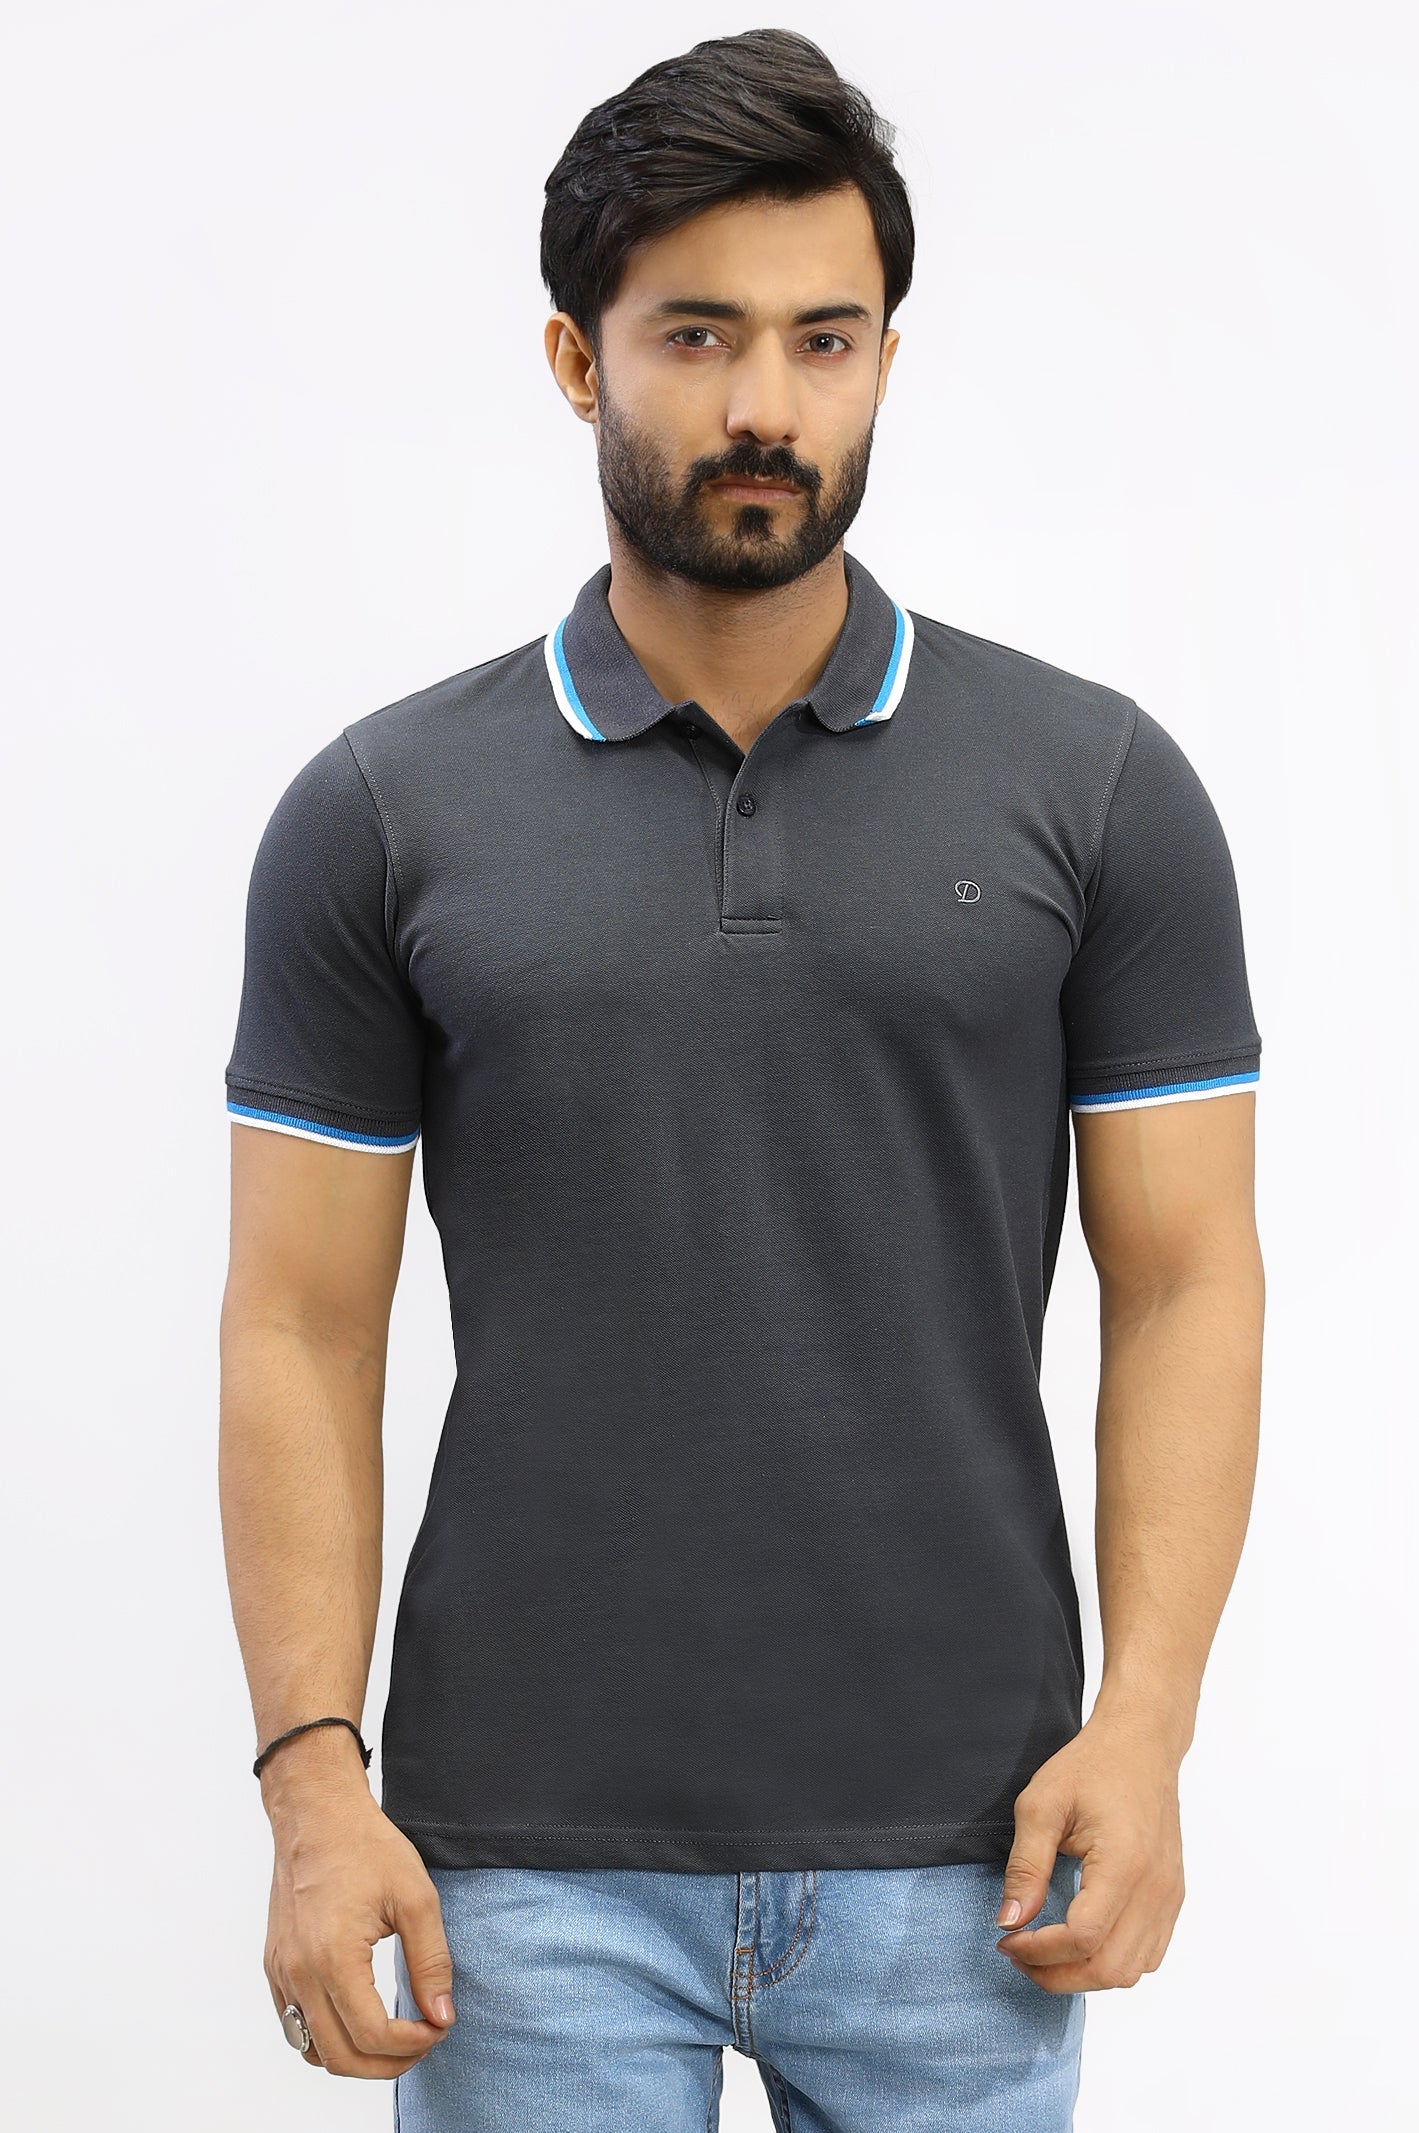 Basic Polo Shirt From Diners